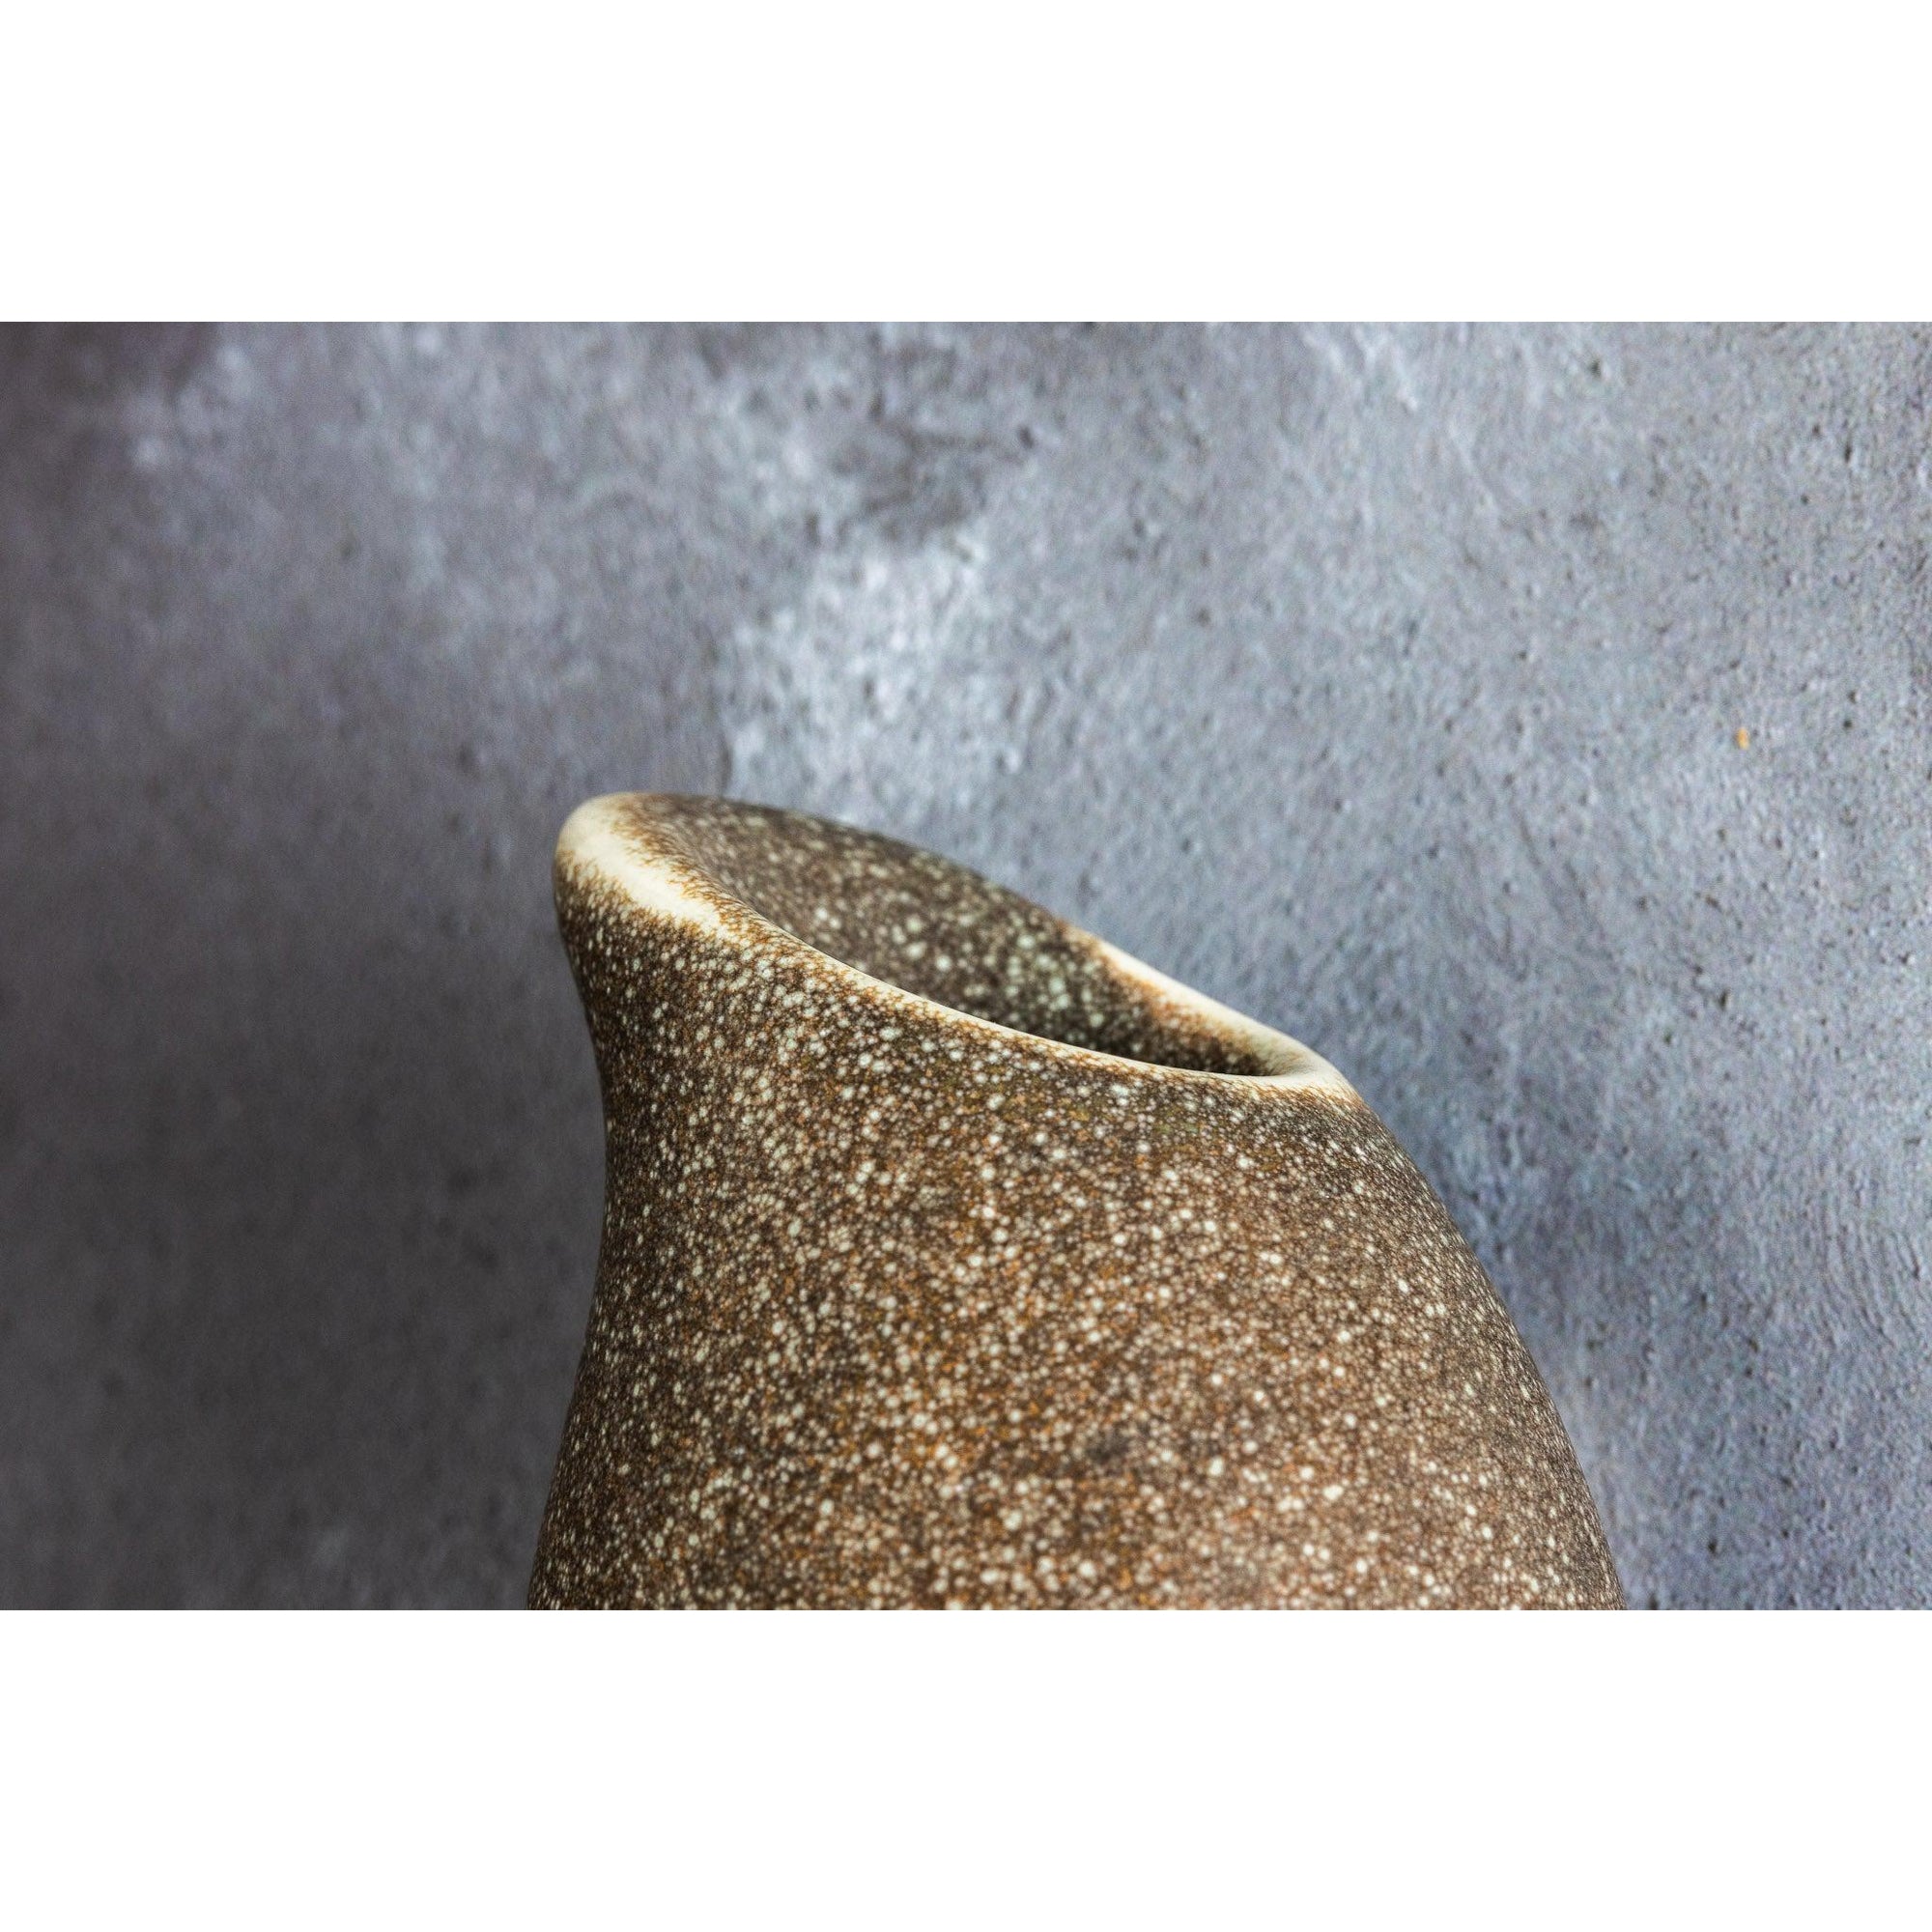 KSR2 Droplet Wall Vase by Kate Schuricht, available at Padstow Gallery, Cornwall